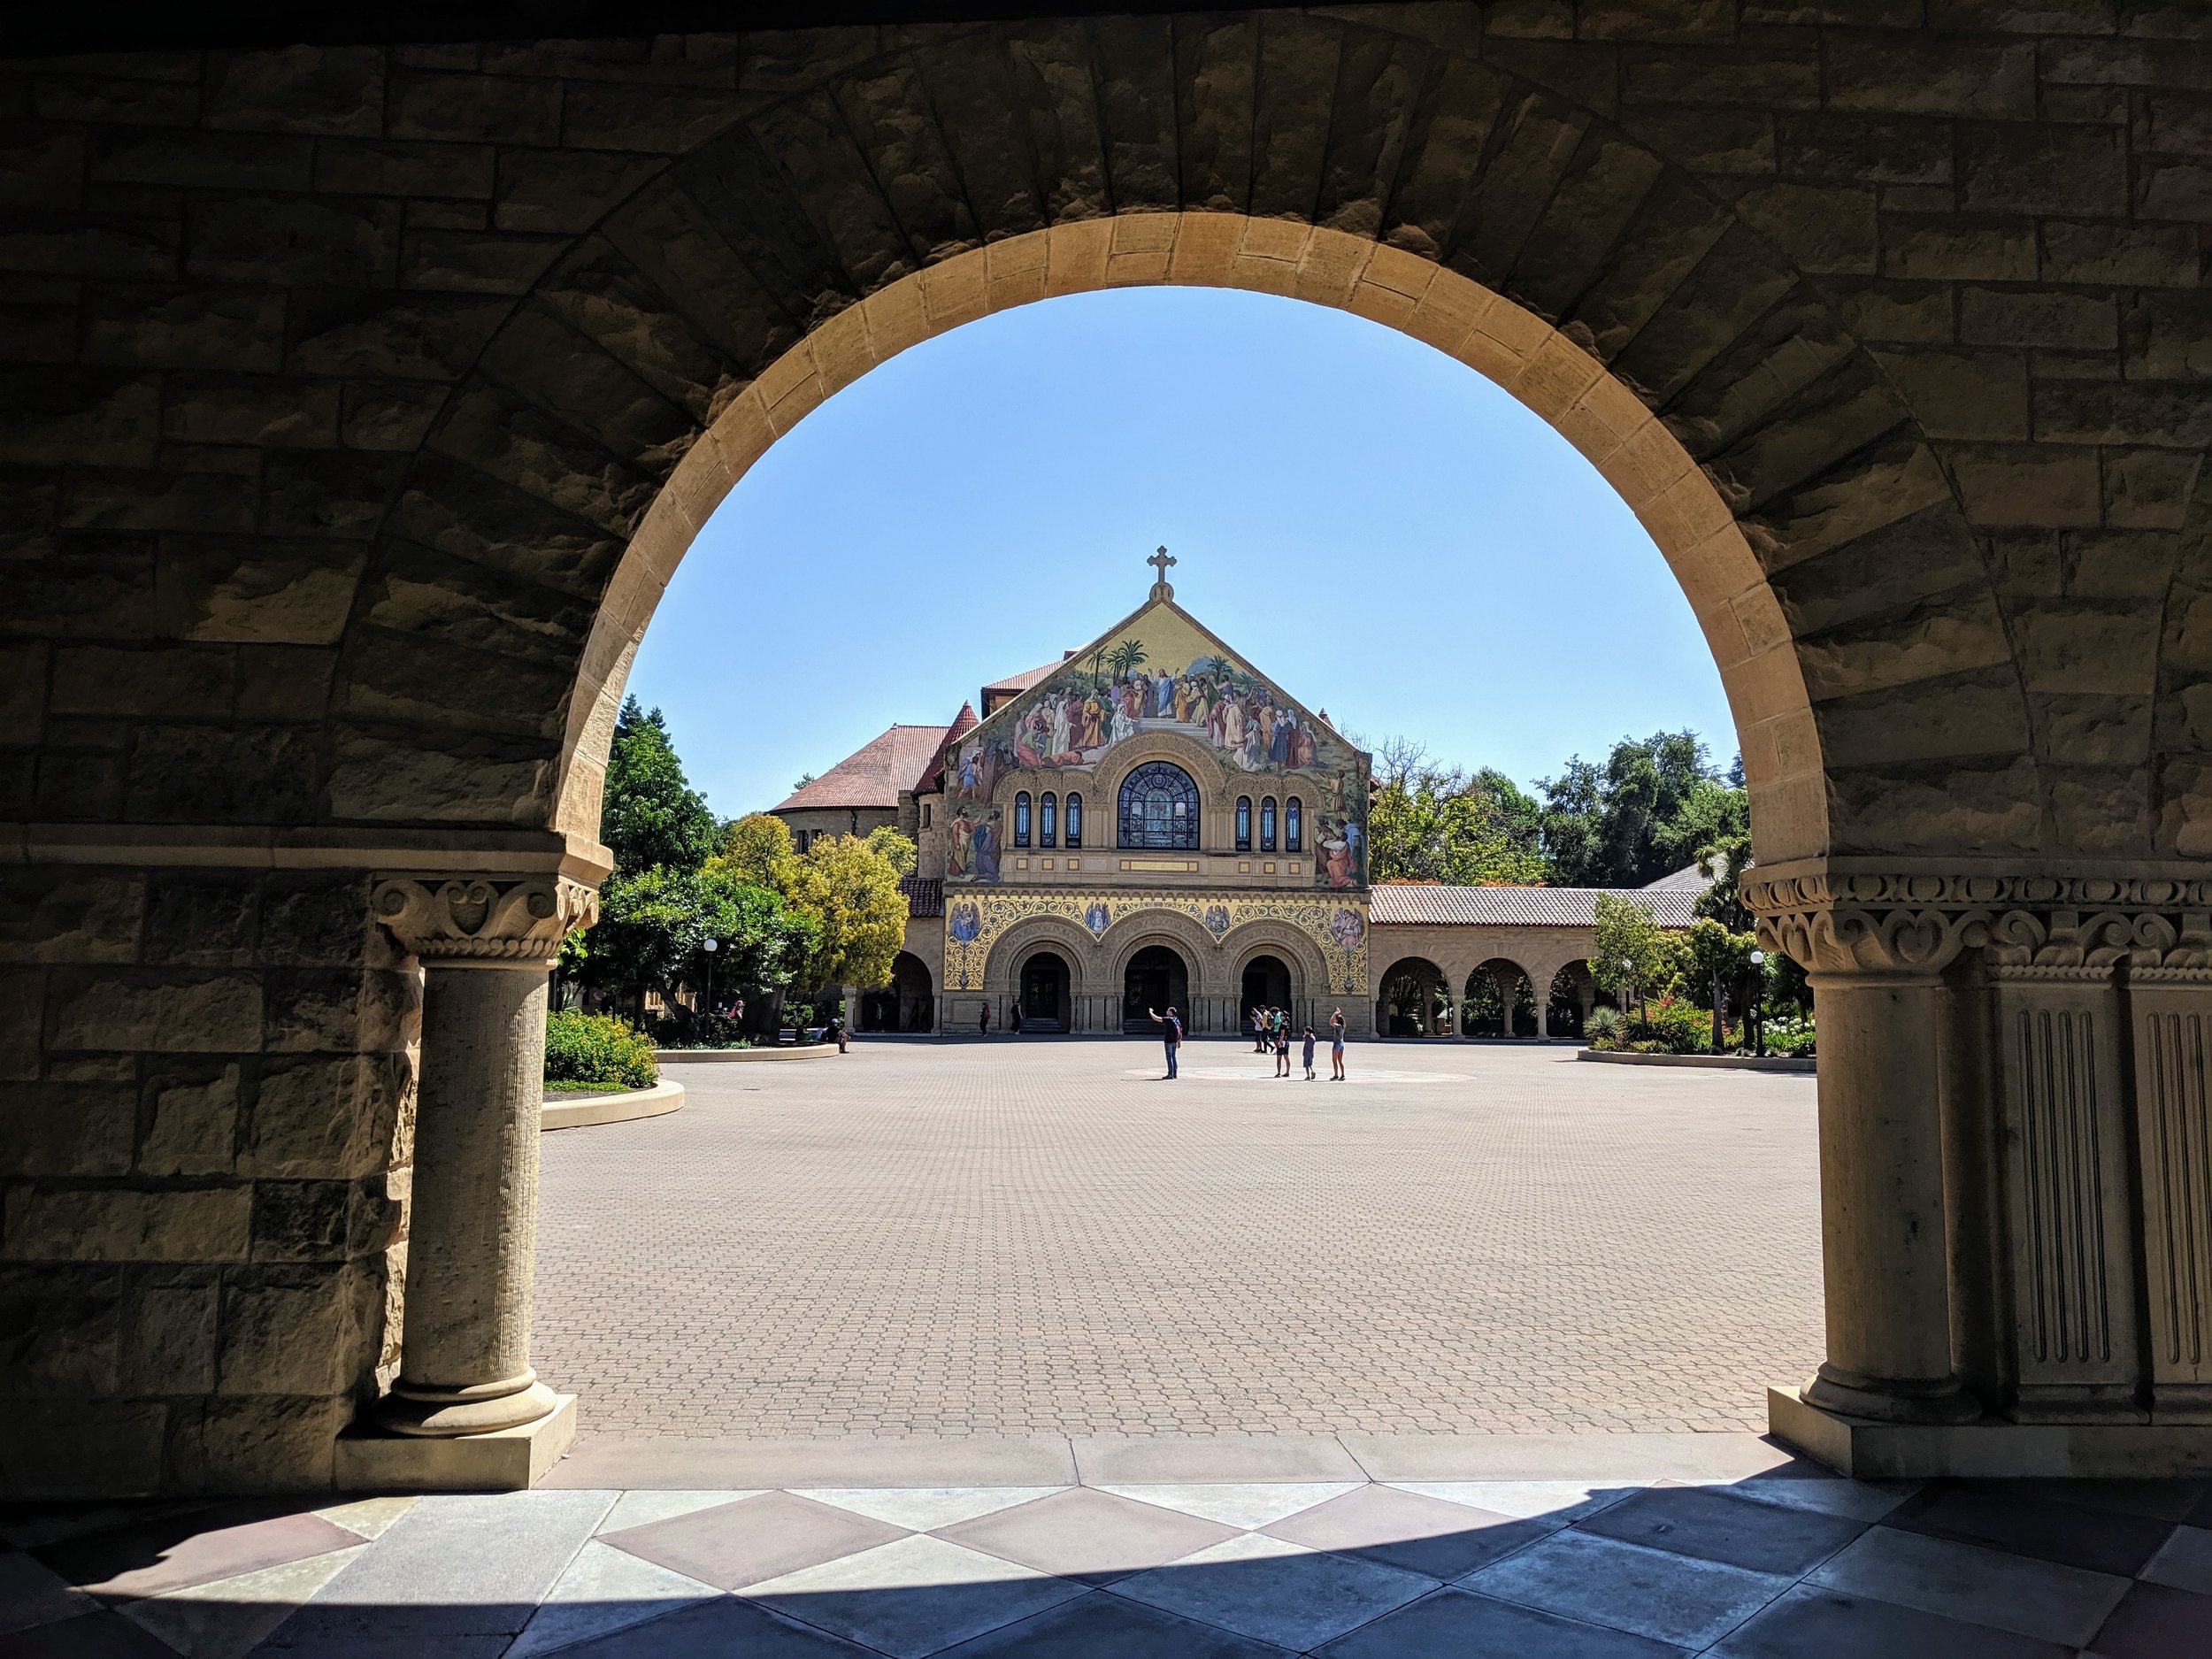  Stanford Memorial Church on the Quad. 